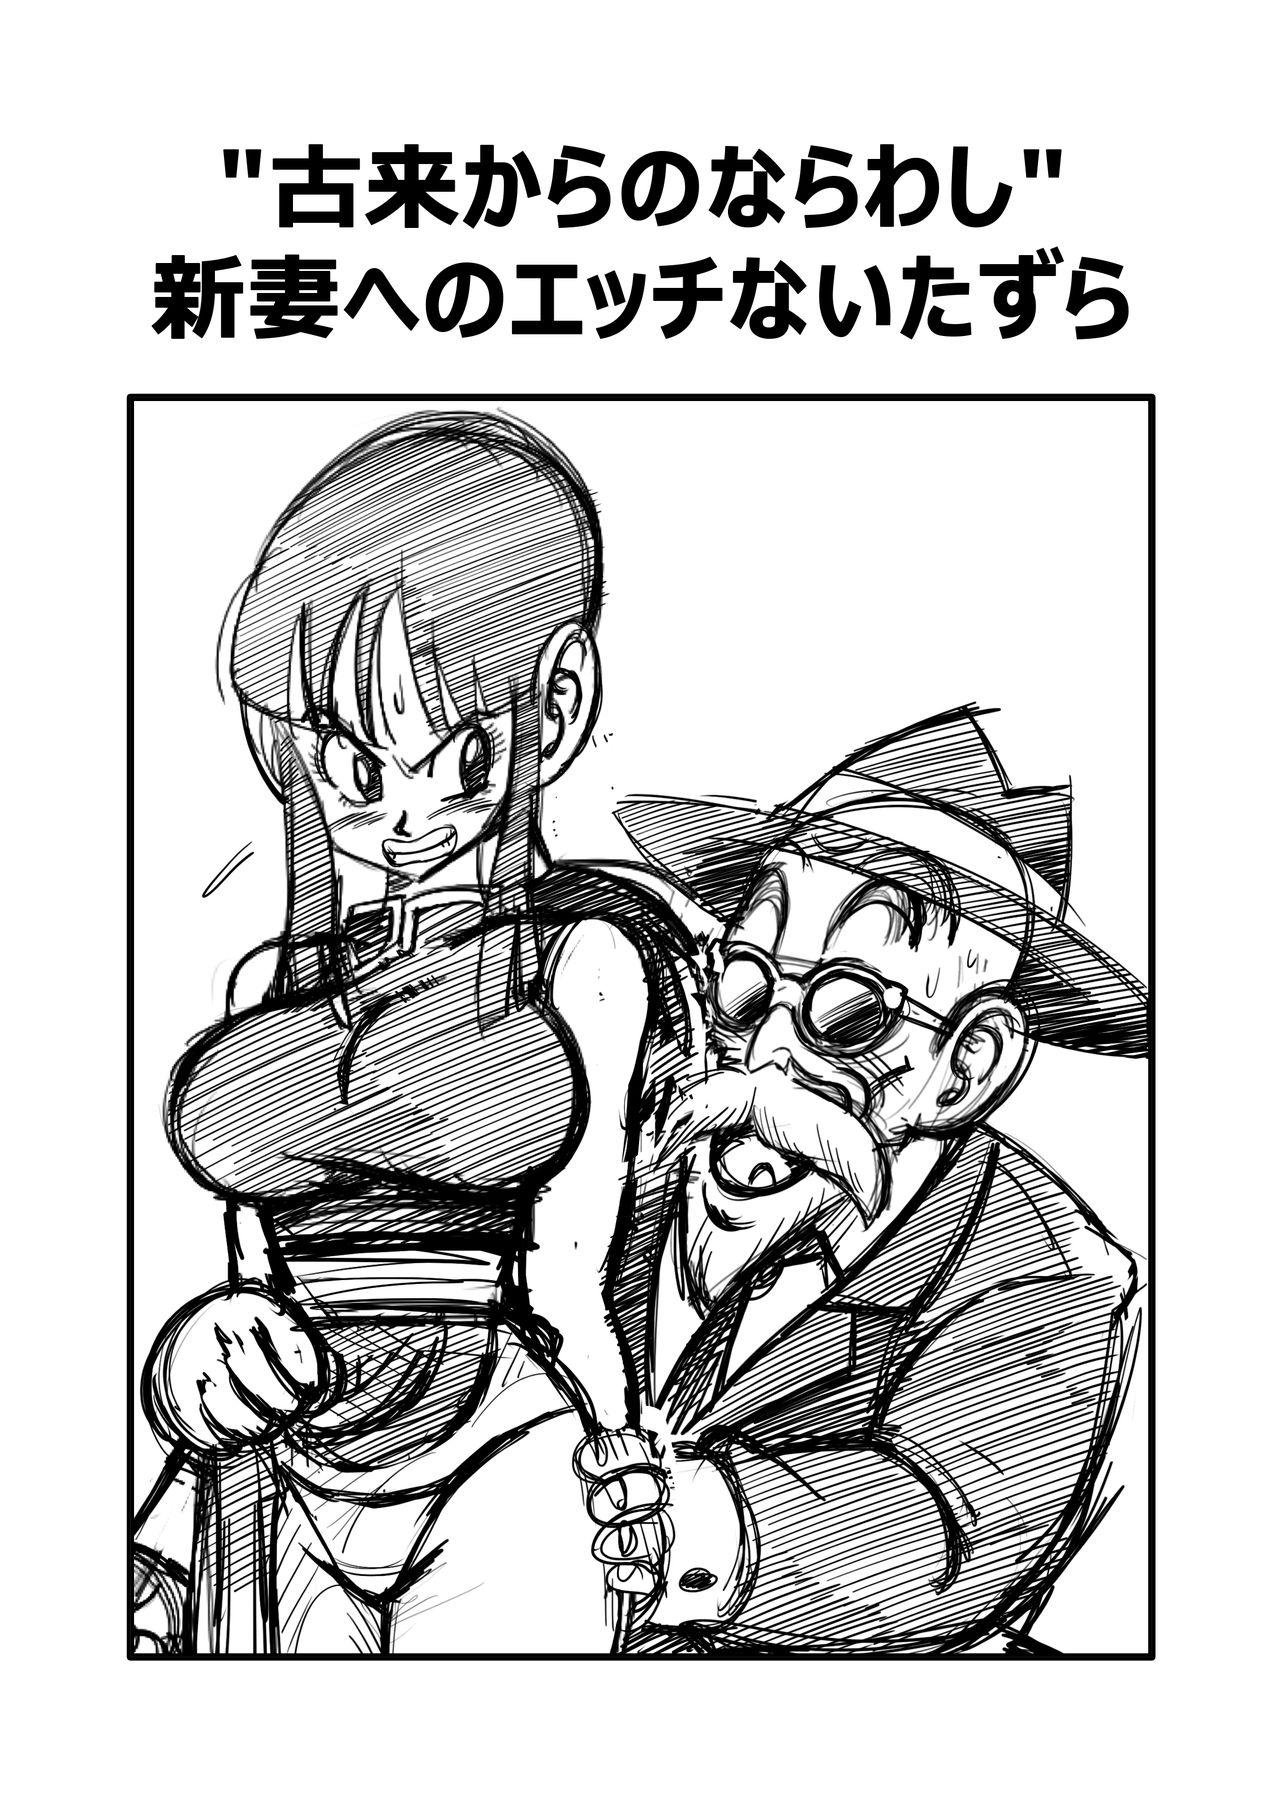 Hot Pussy "An Ancient Tradition" - Young Wife is Harassed! - Dragon ball z Cam - Page 3